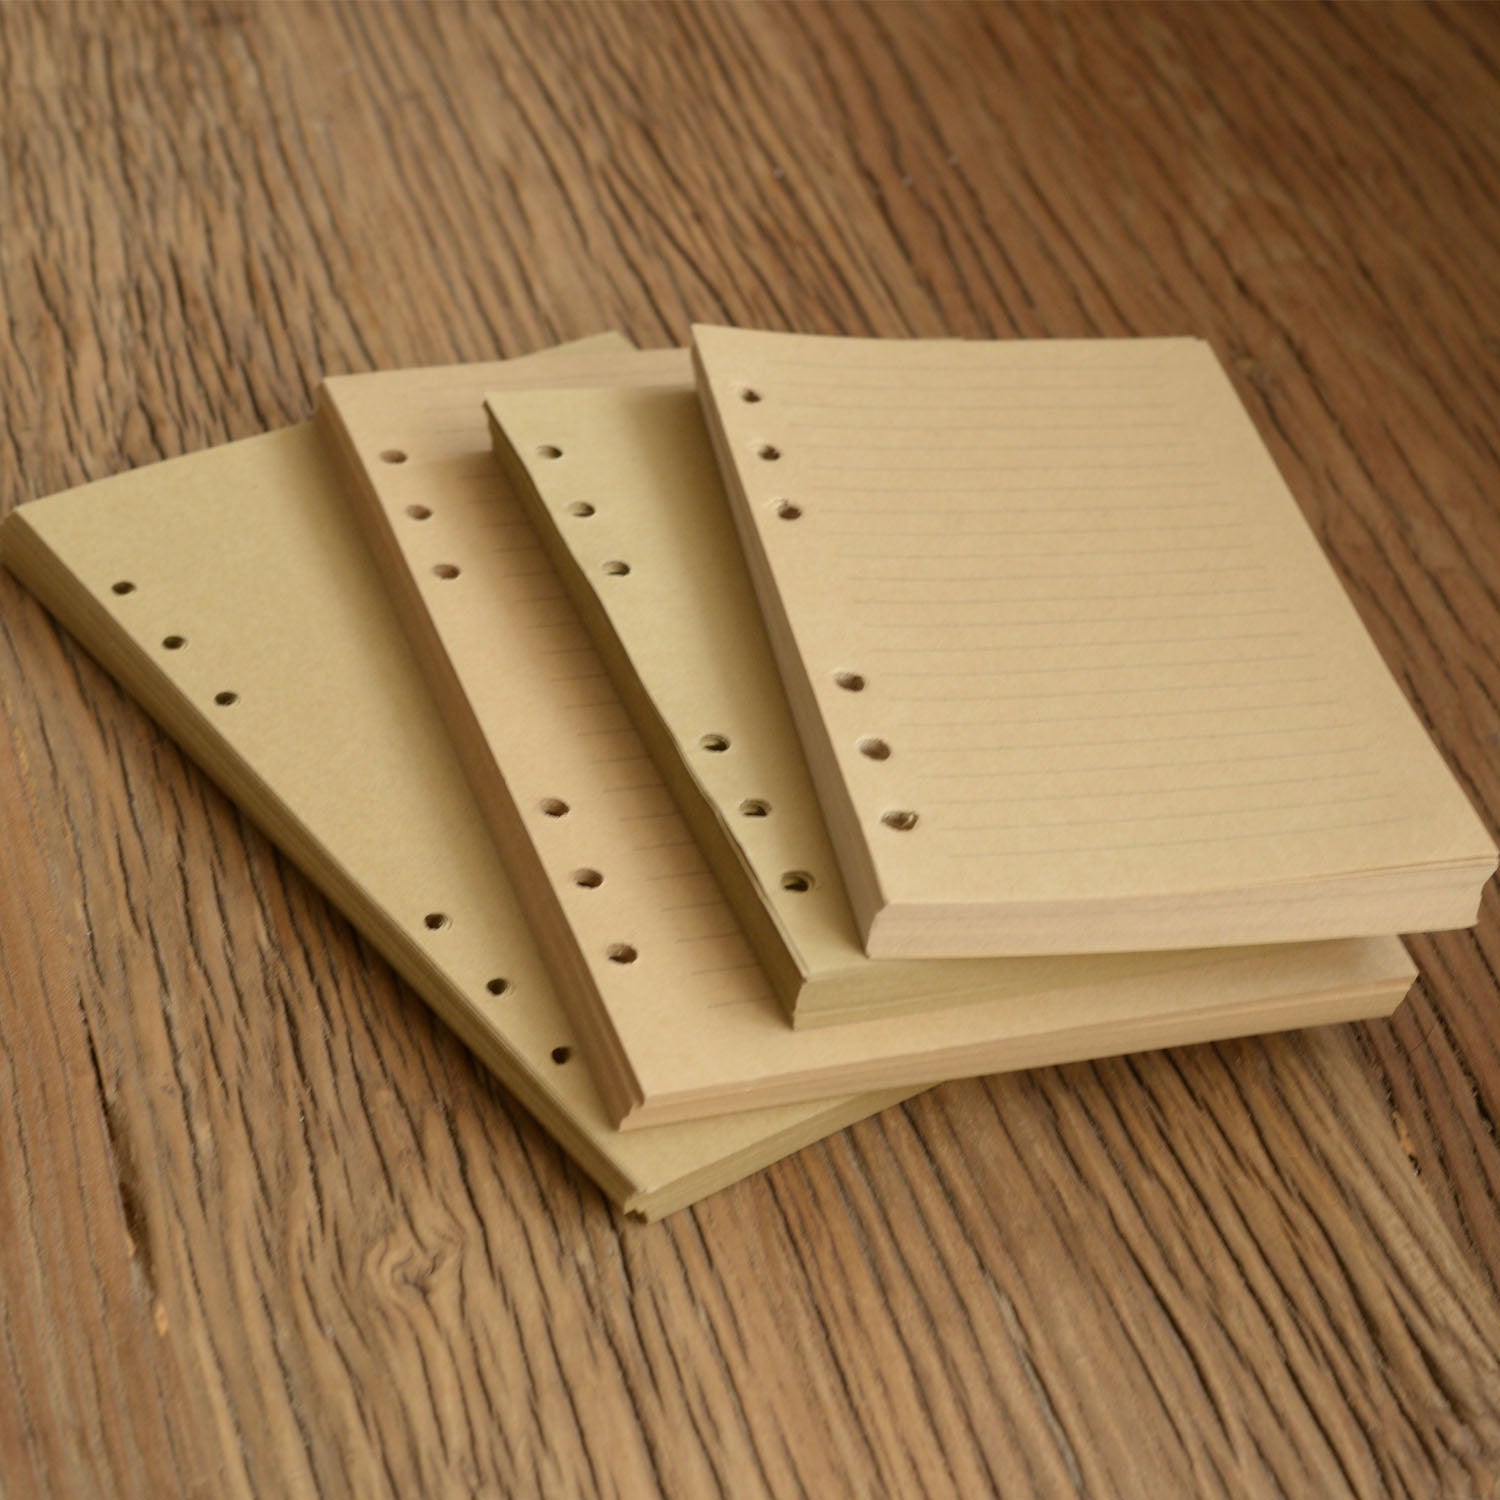 Wanna This Diary refill papers for A5 size 6 ring binder